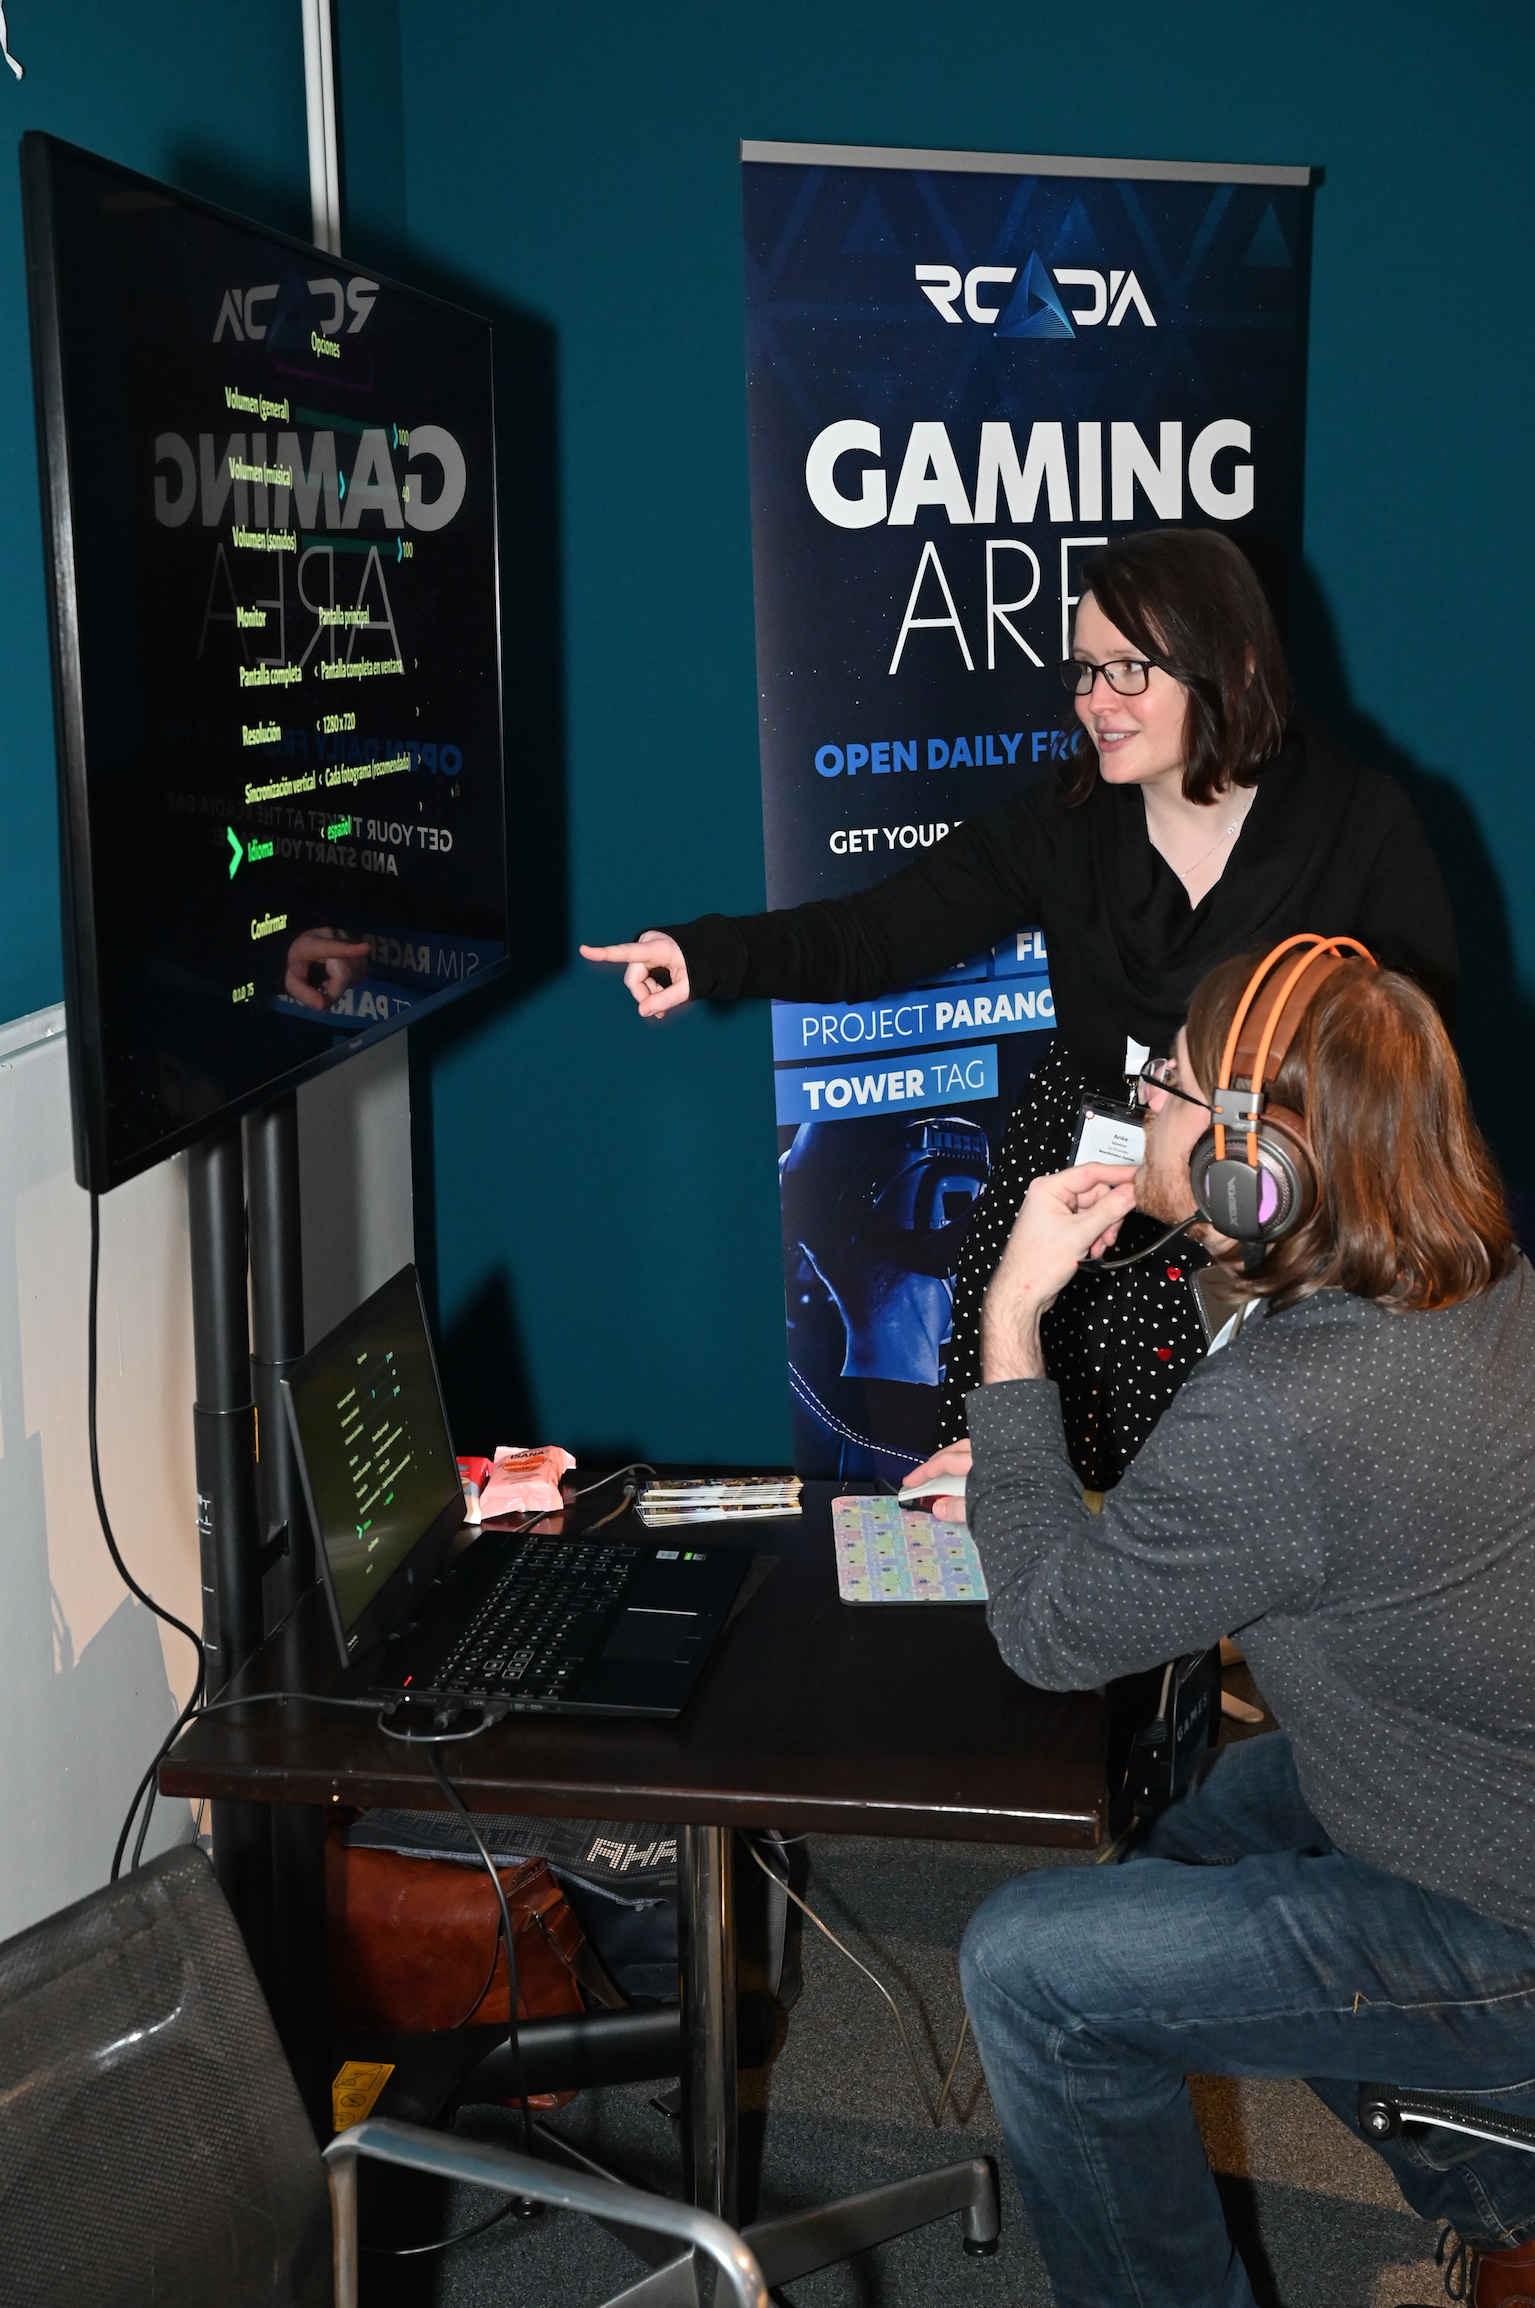 Anke Günther (Beardshaker Games) presenting a demo for "Soultaire"